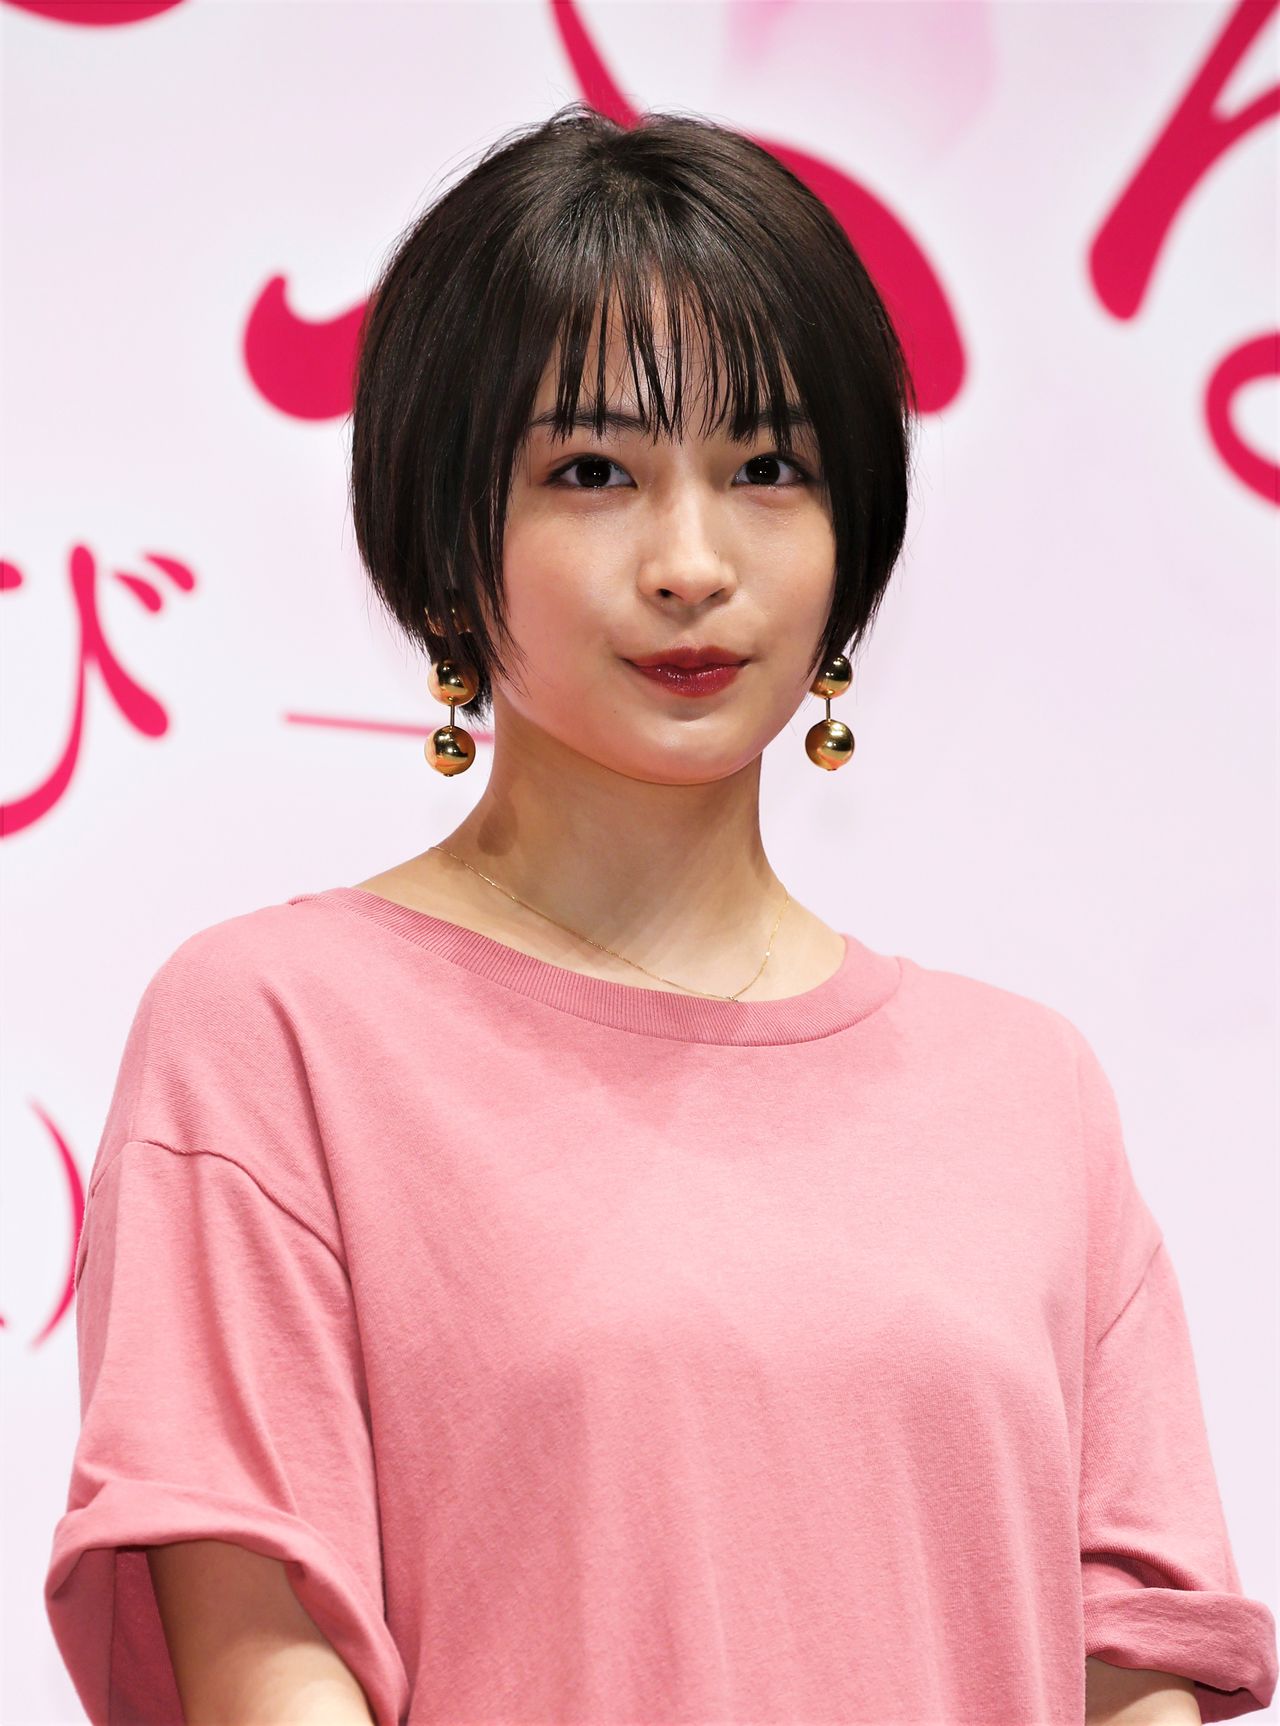 Three Chihayafuru movies were produced from 2016 to 2018. Actress Hirose Suzu played the heroine. Here, Hirose appears at a March 6, 2018, preview event for Chihayafuru: Musubi. (© Jiji)